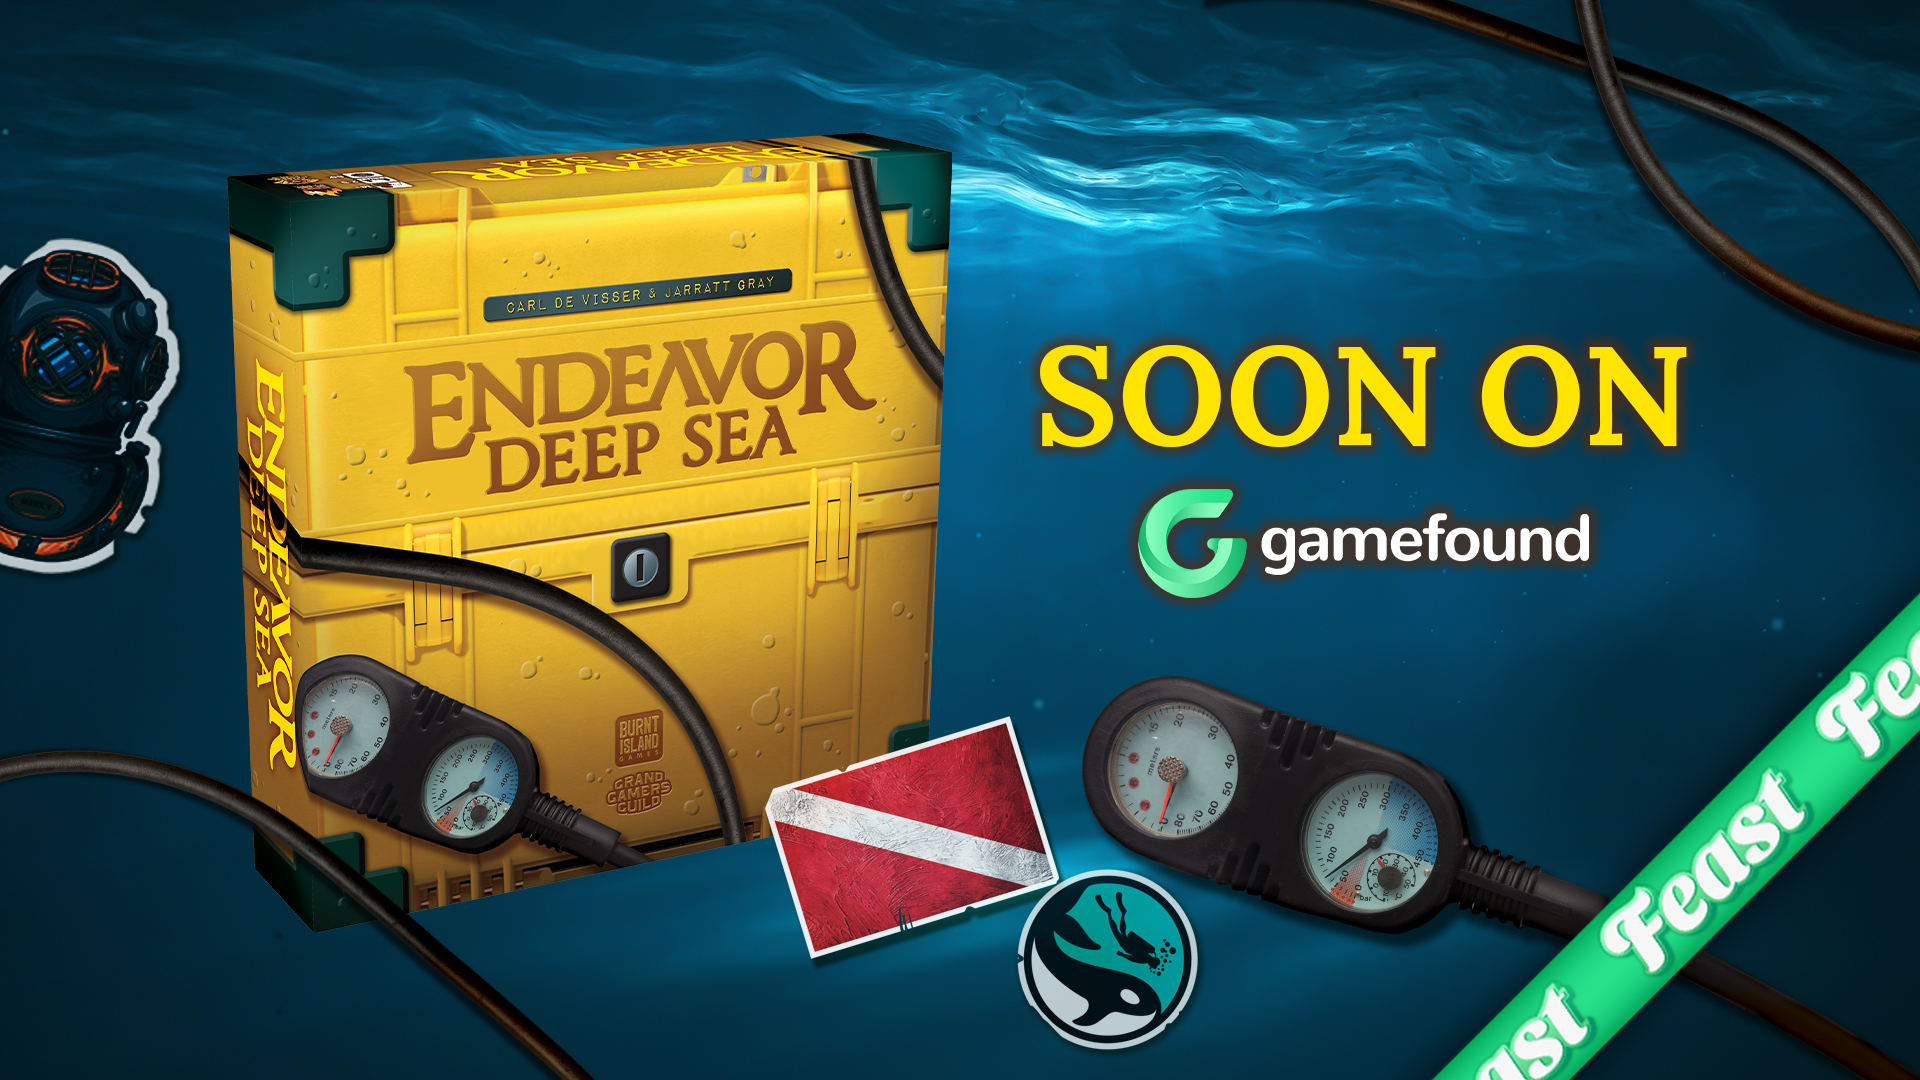 Check out Endeavor: Deep Sea on Gamefound